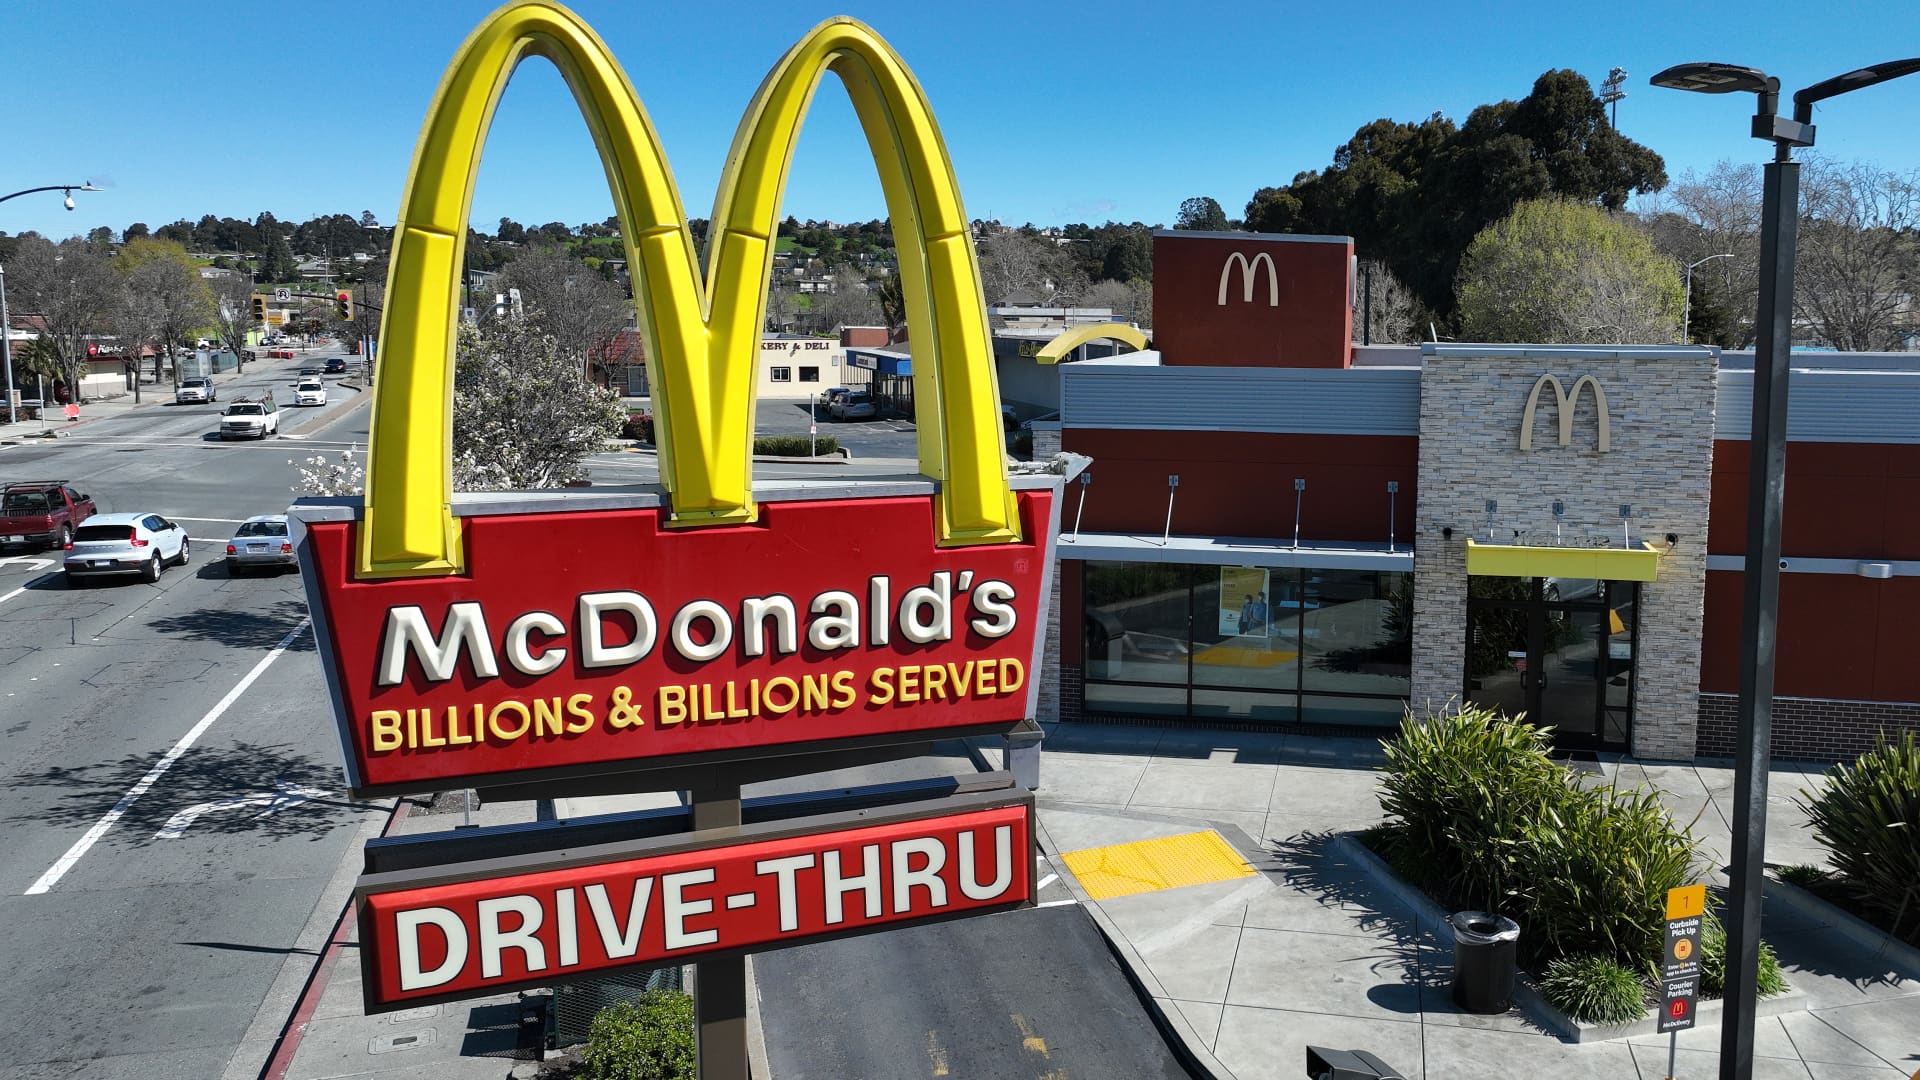 McDonald's is about to report earnings. Here's what to expect